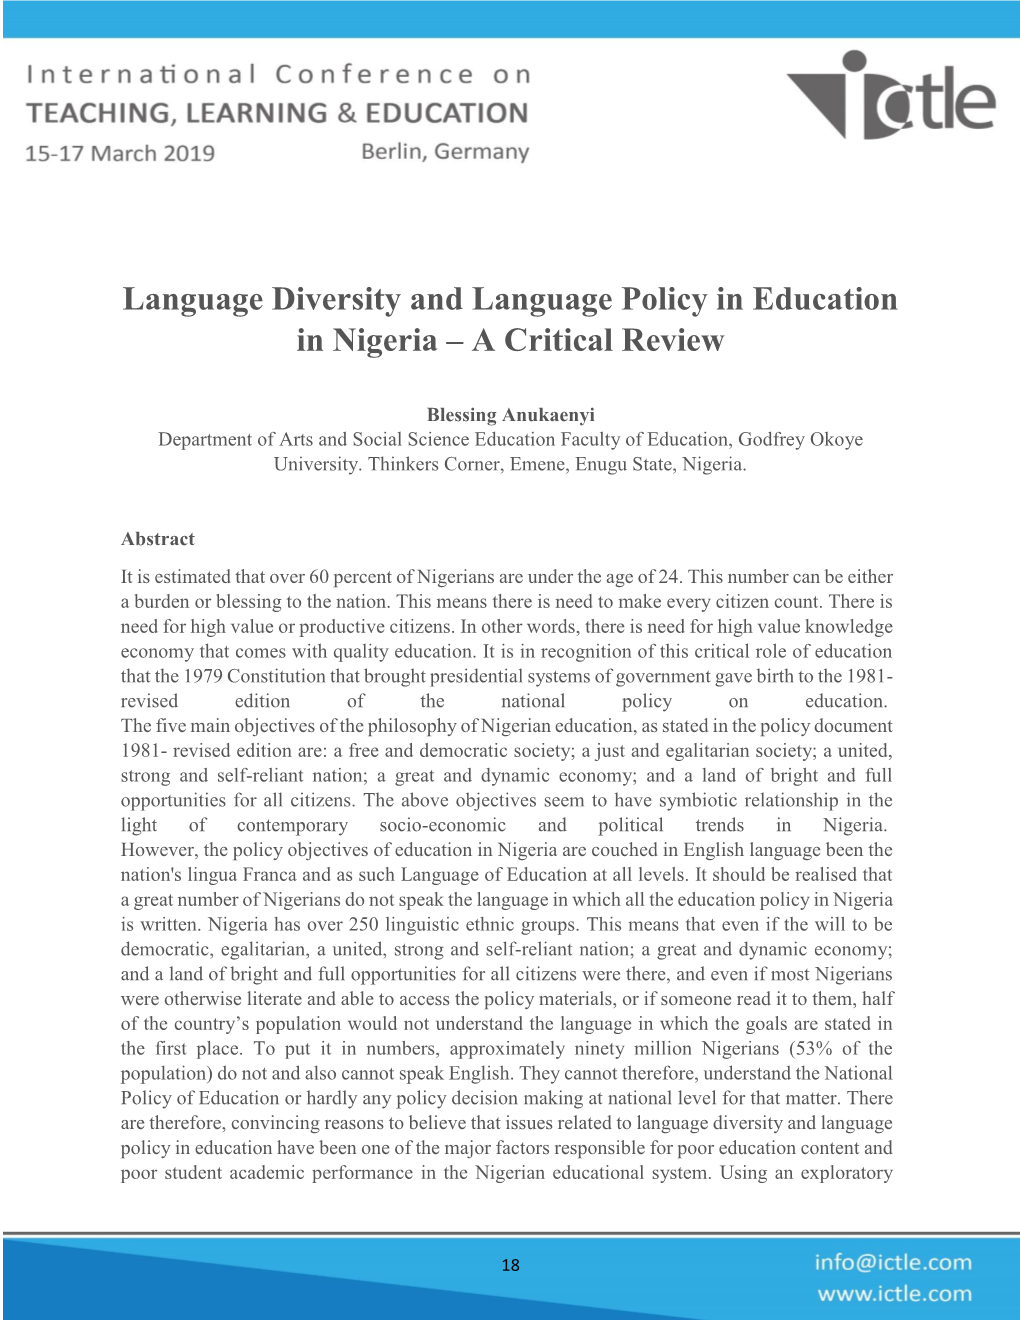 Language Diversity and Language Policy in Education in Nigeria – a Critical Review